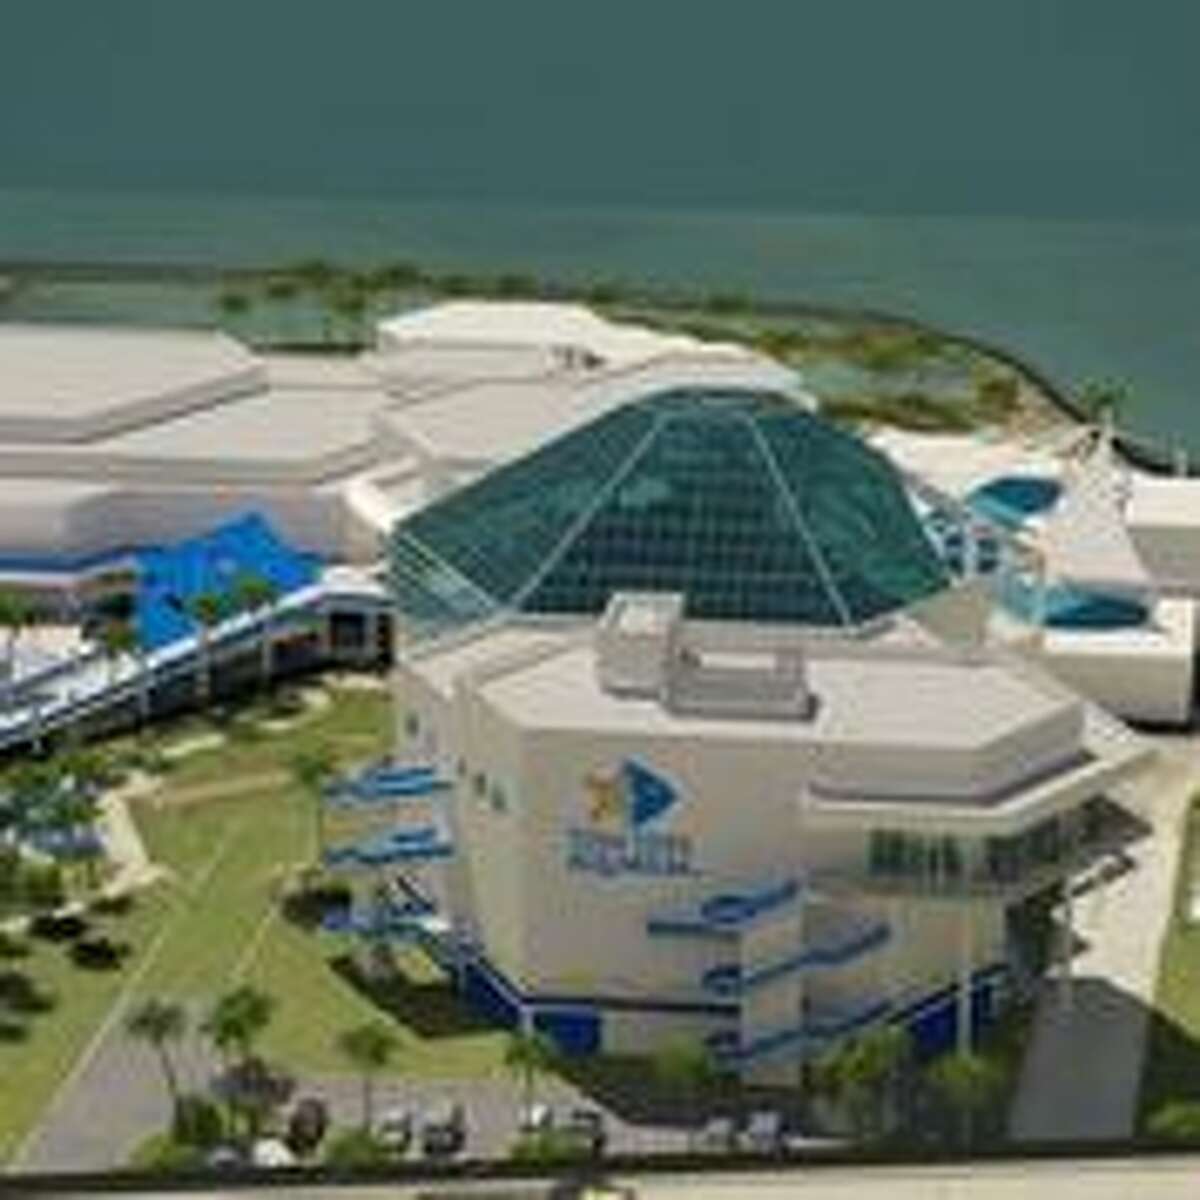 Texas State Aquarium in Corpus Christi vying to be the top